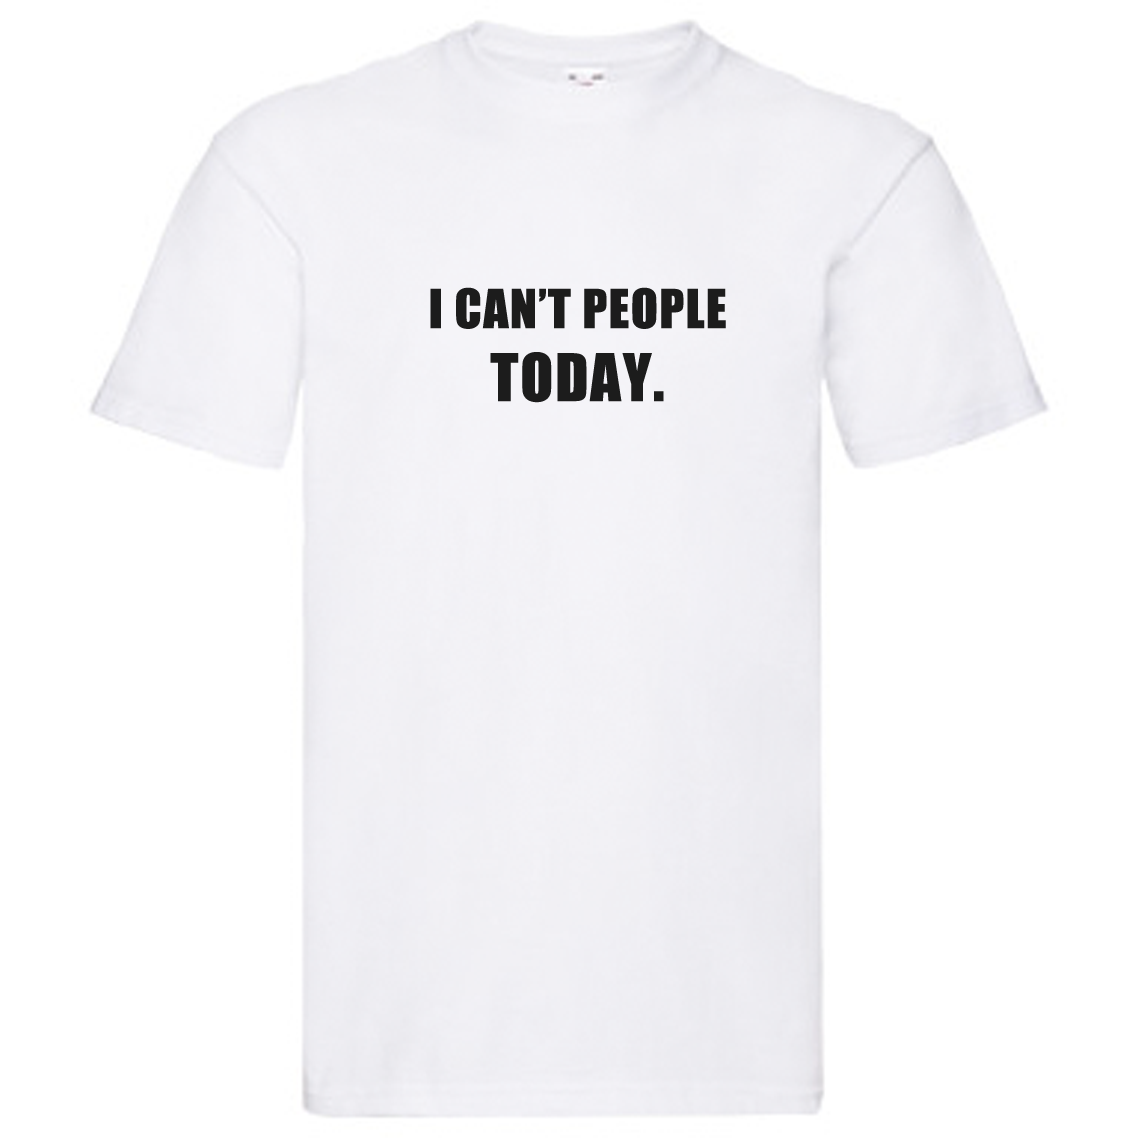 T-Shirt - I can't people today